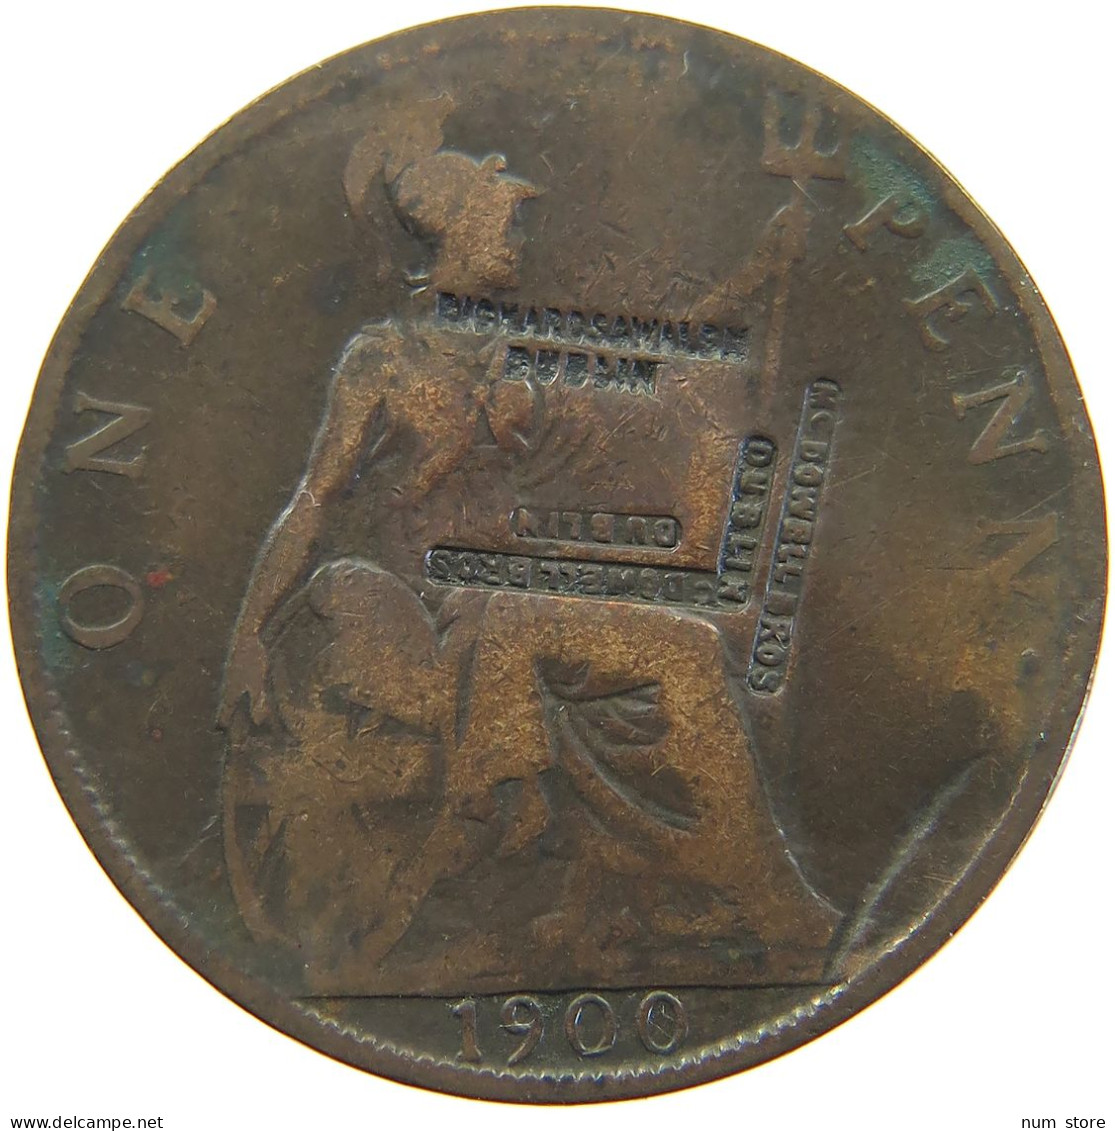 GREAT BRITAIN PENNY 1900 VICTORIA 1837-1901 COUNTERMARKED MCDOWELL BROS DUBLIN AND OTHER 2 #MA 067745 - D. 1 Penny